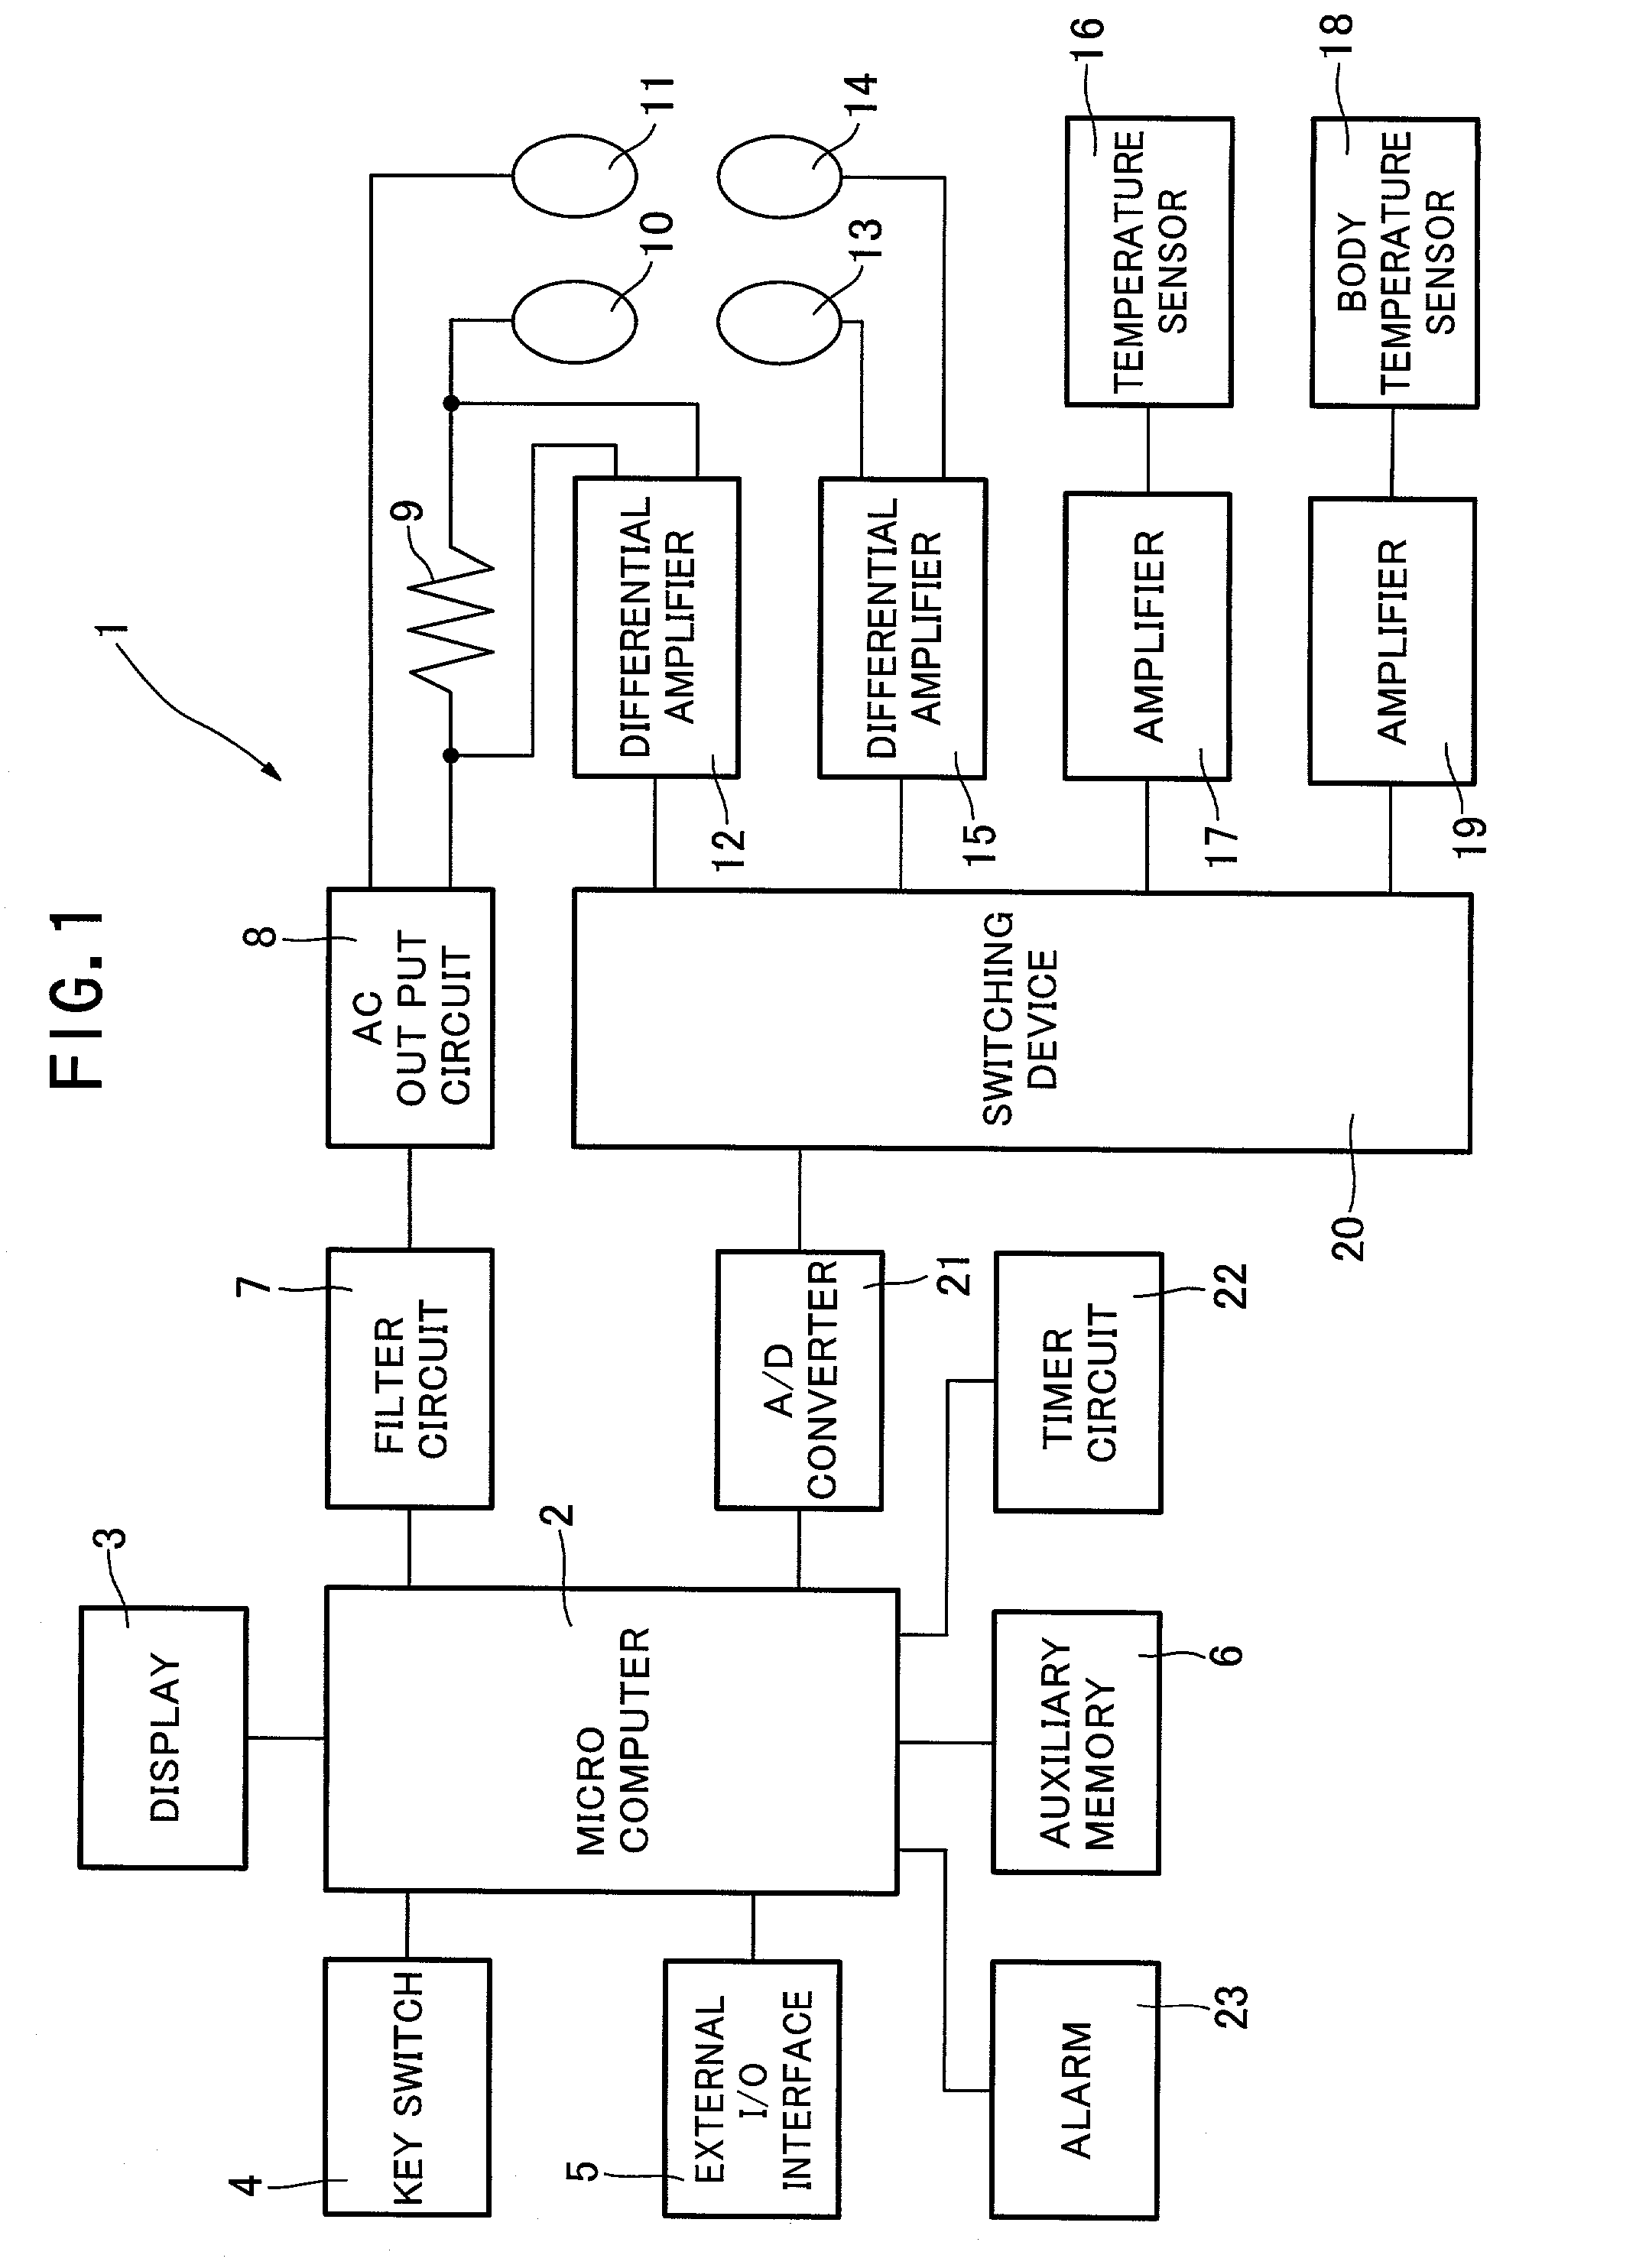 Dehydration condition judging apparatus by measuring bioelectric impedance